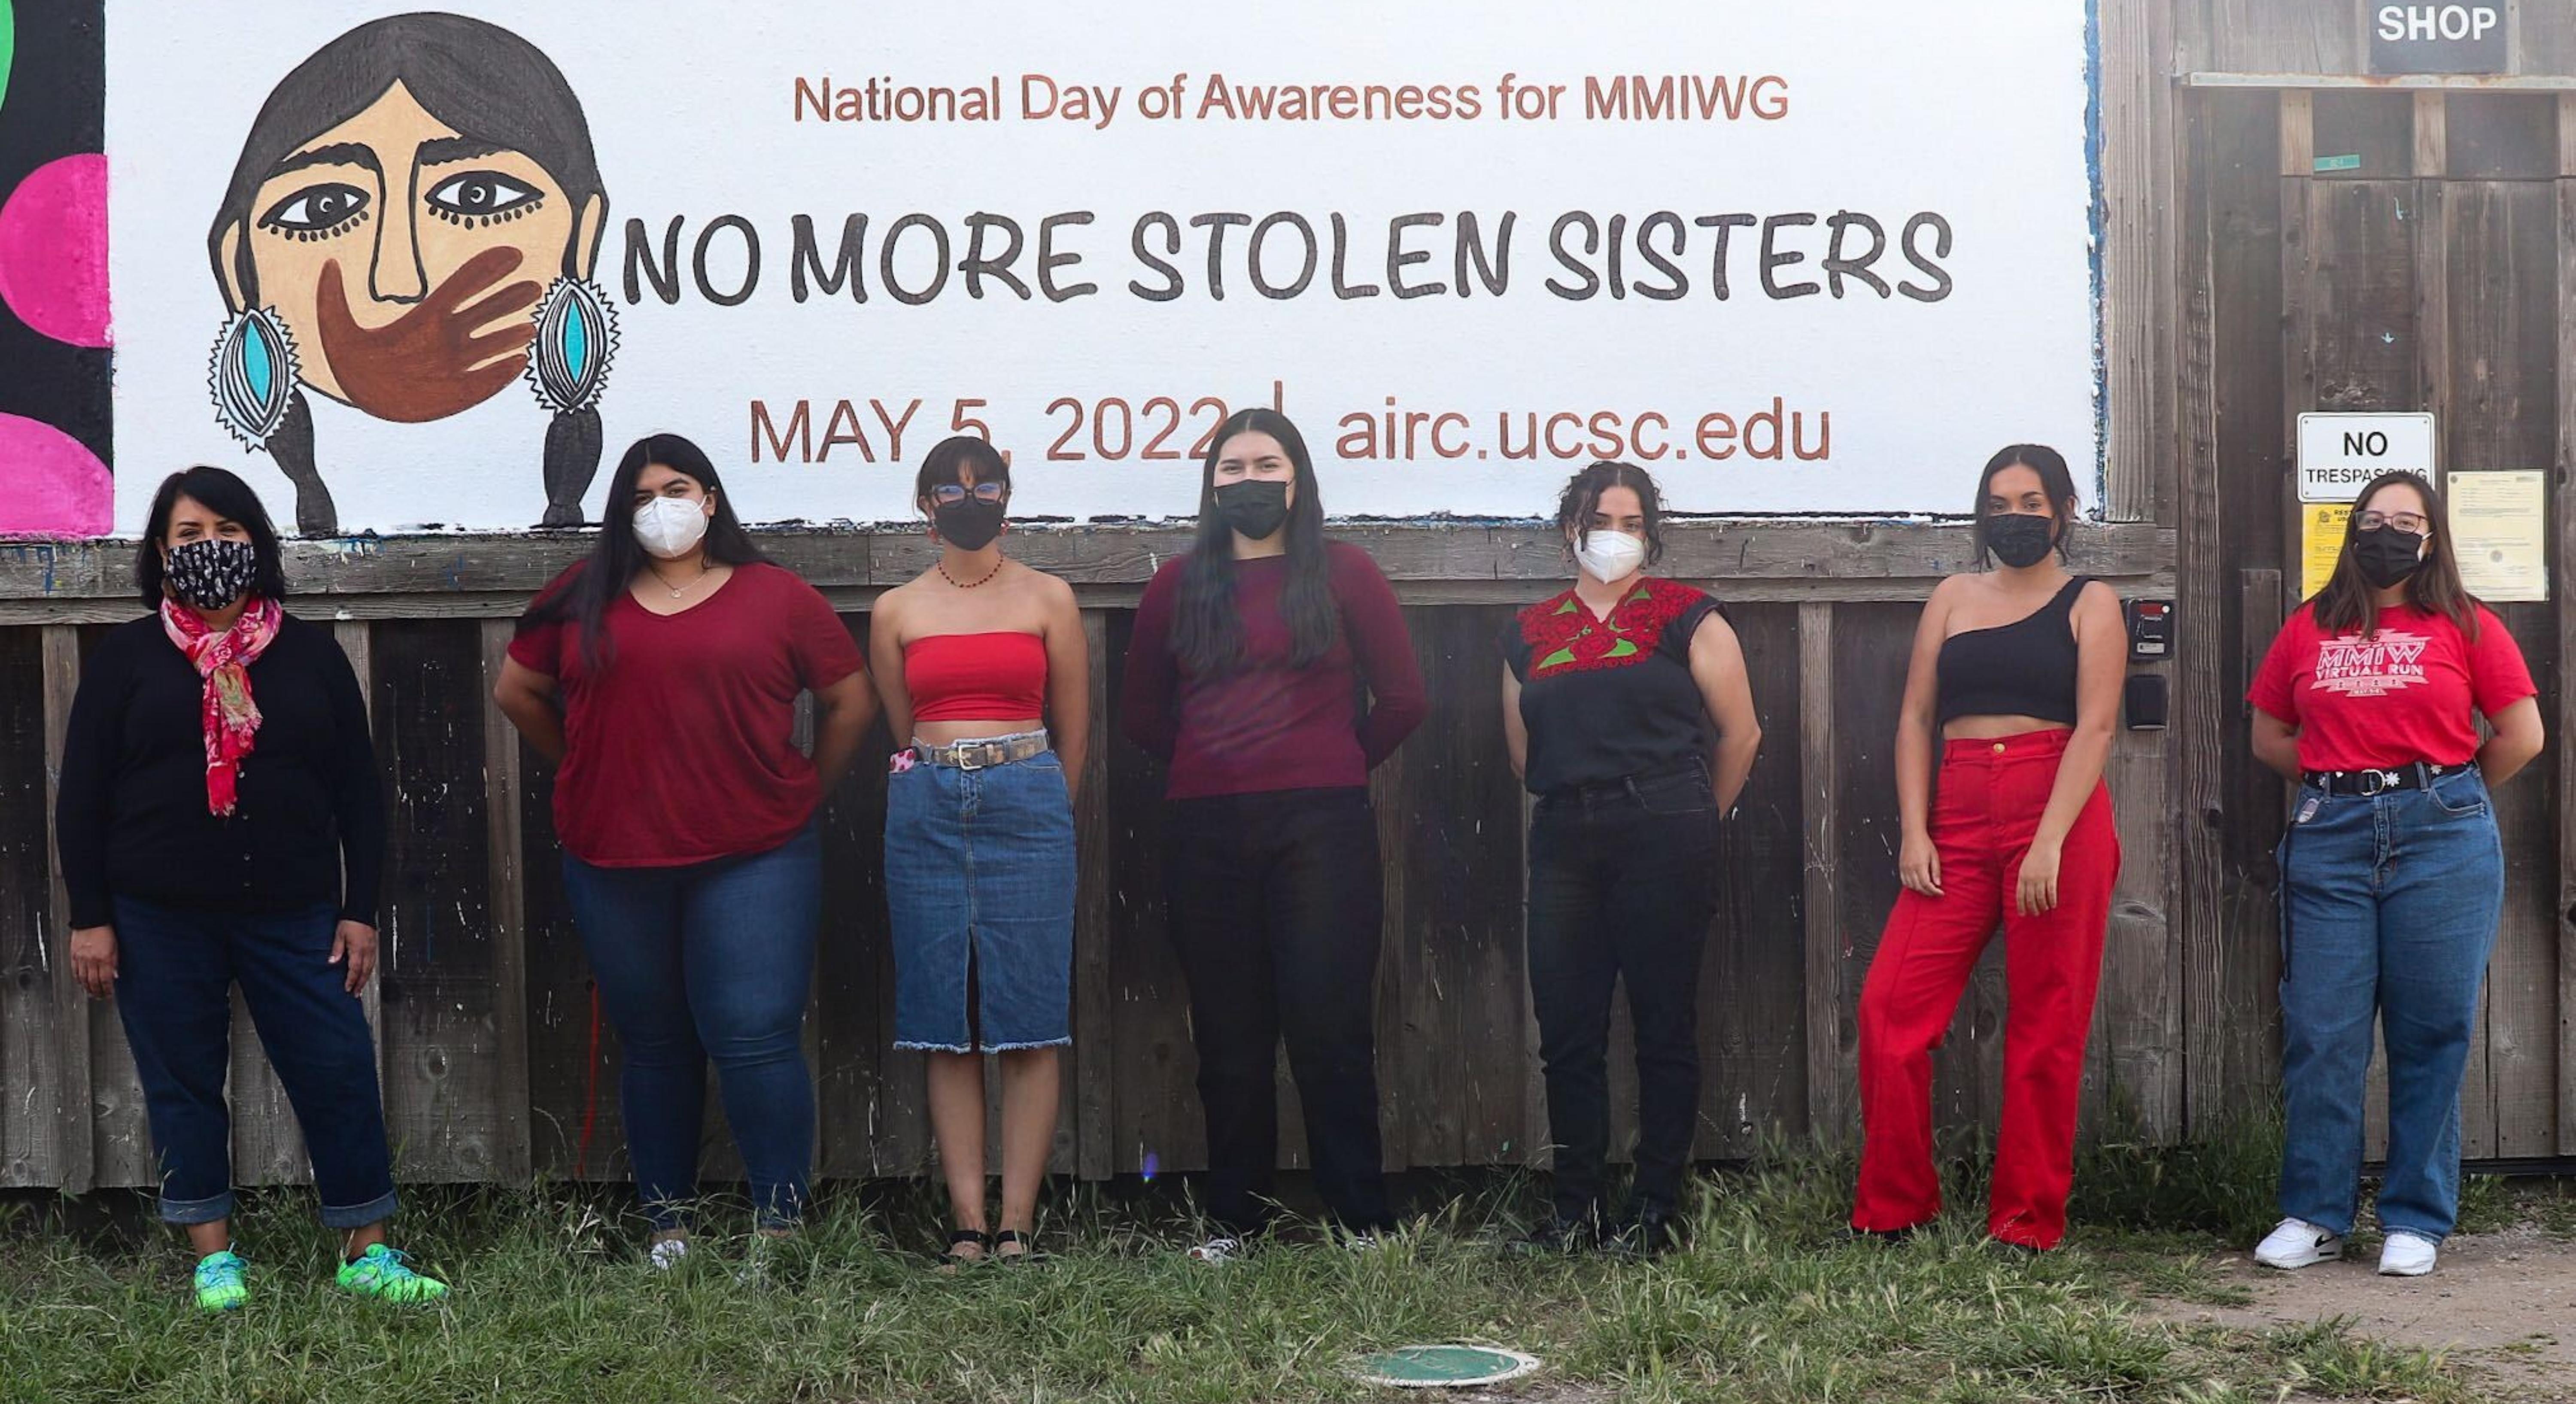 AIRC team posing in front of MMIWG banner painted at the base of UCSC campus, May 2022